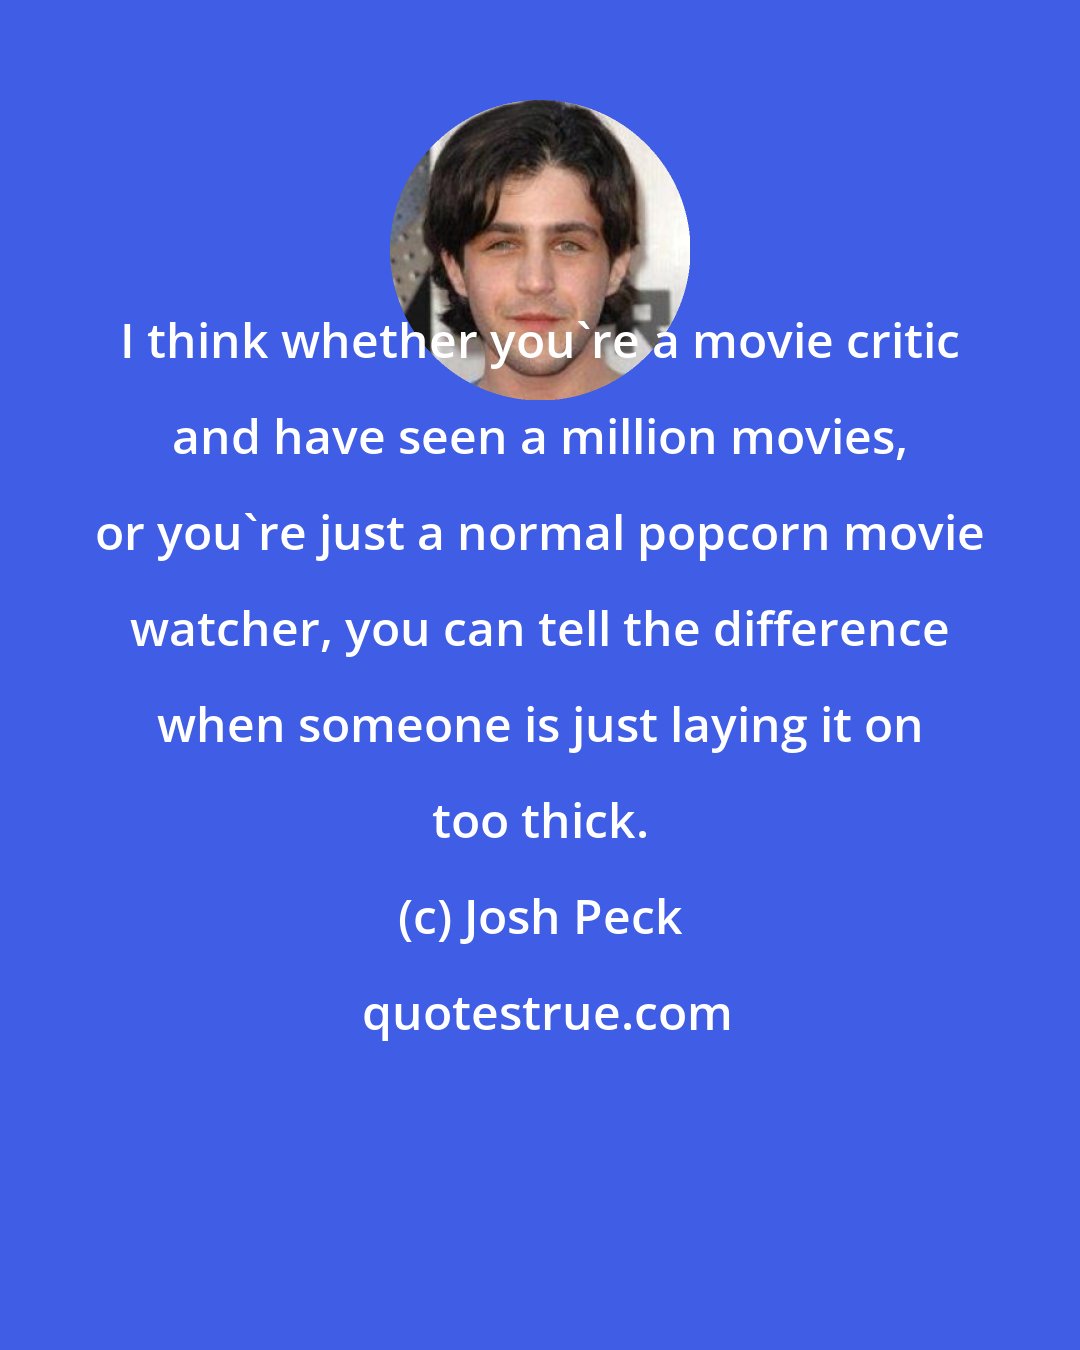 Josh Peck: I think whether you're a movie critic and have seen a million movies, or you're just a normal popcorn movie watcher, you can tell the difference when someone is just laying it on too thick.